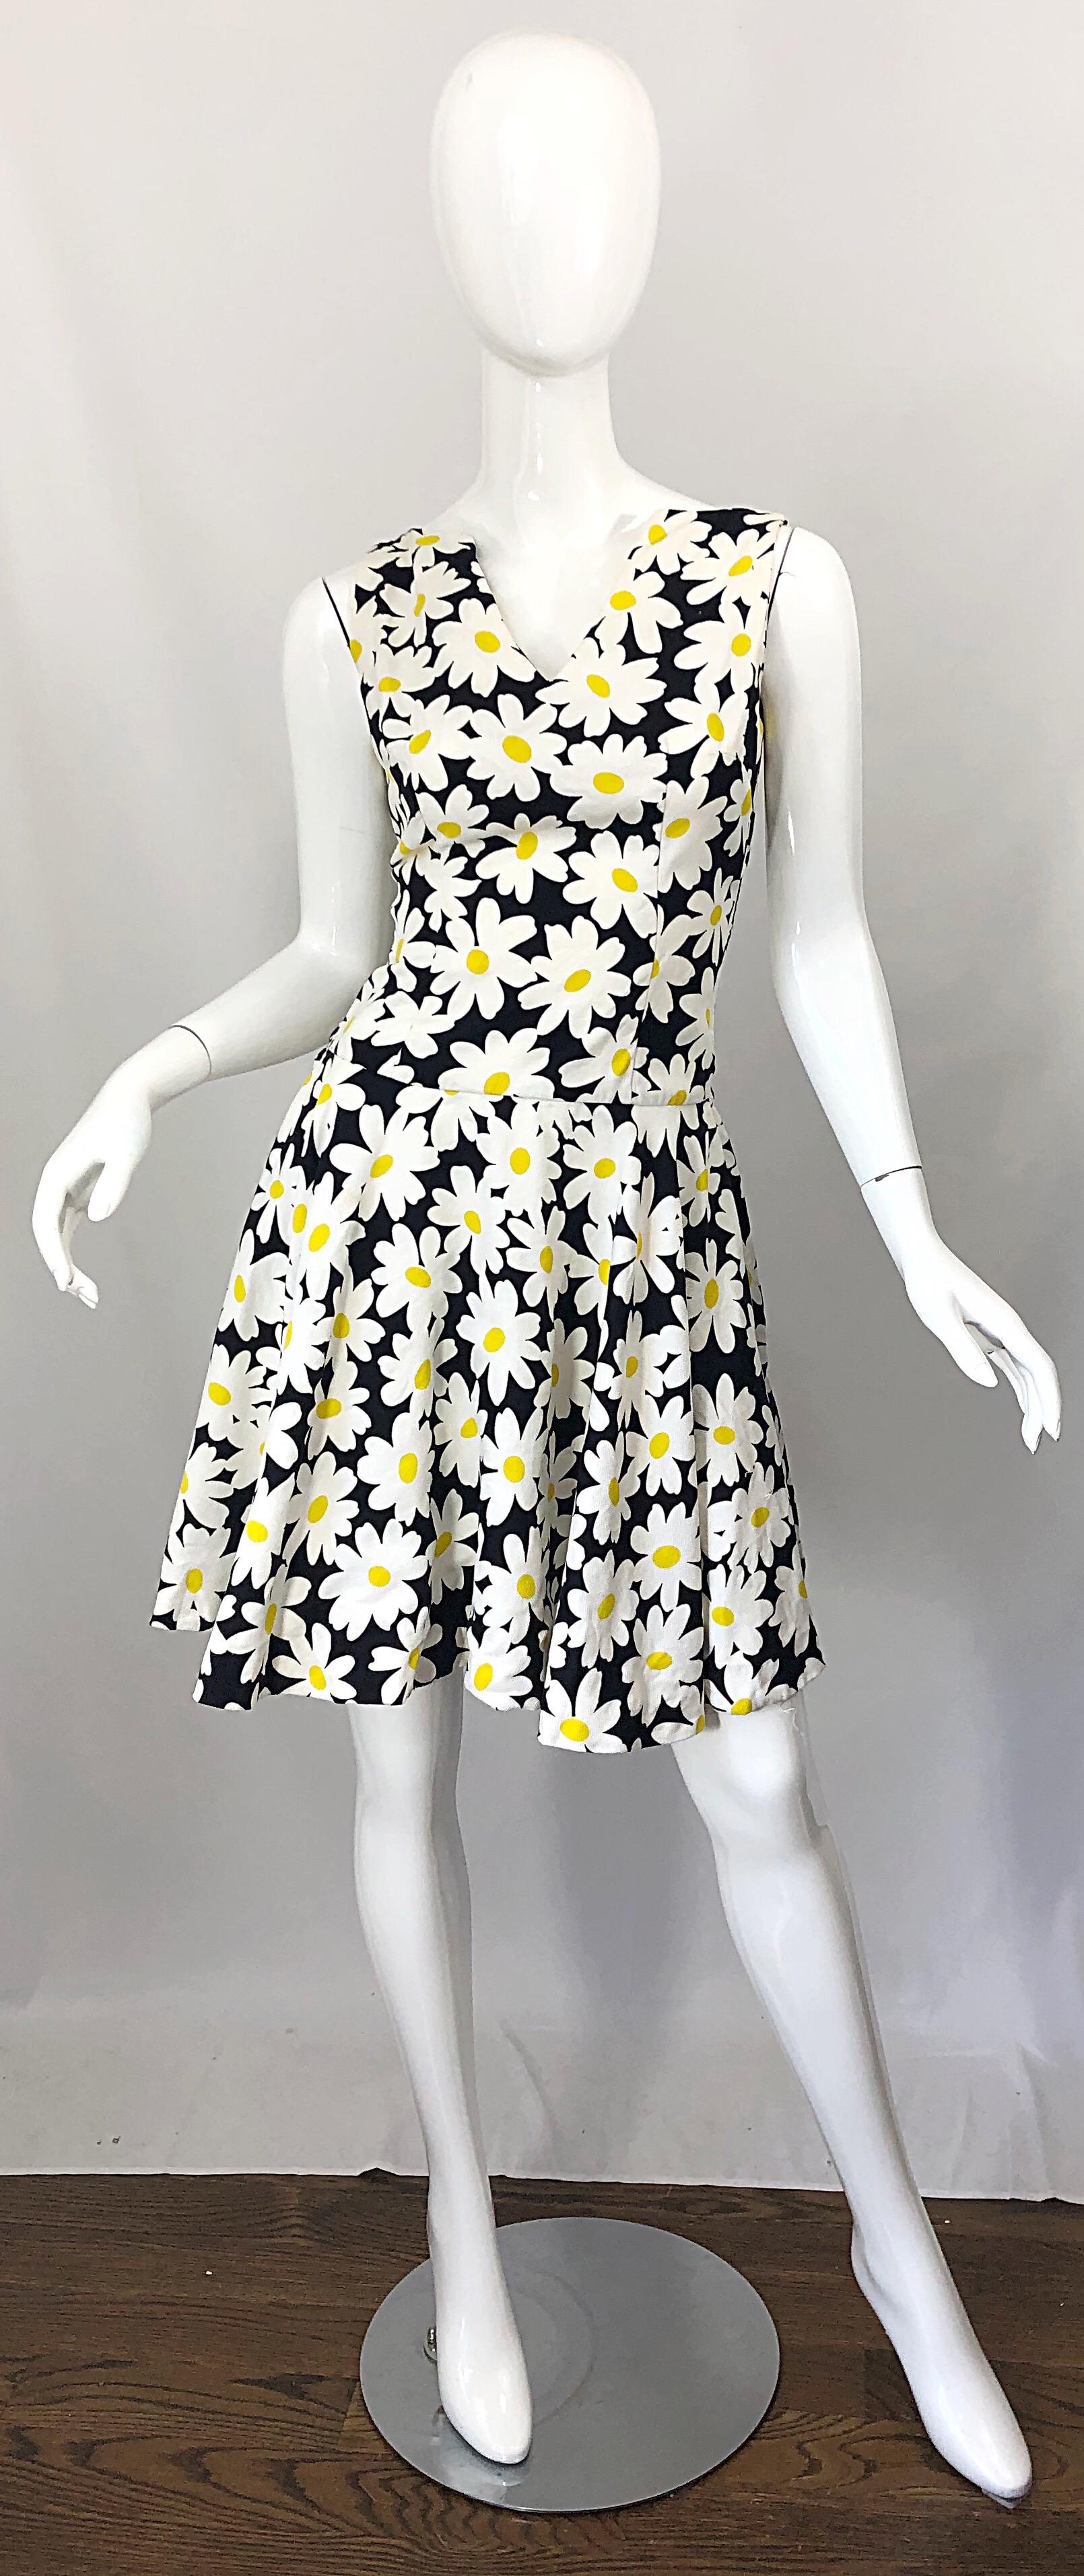 Chic 1960s I. MAGNIN black, white and yellow mod daisy flower print cotton pique A-Line dress! Features a
V-neck bodice with thin straps at each shoulder. Full metal zipper up the back with hook-and-eye closure. Soft comfortable pique cotton is